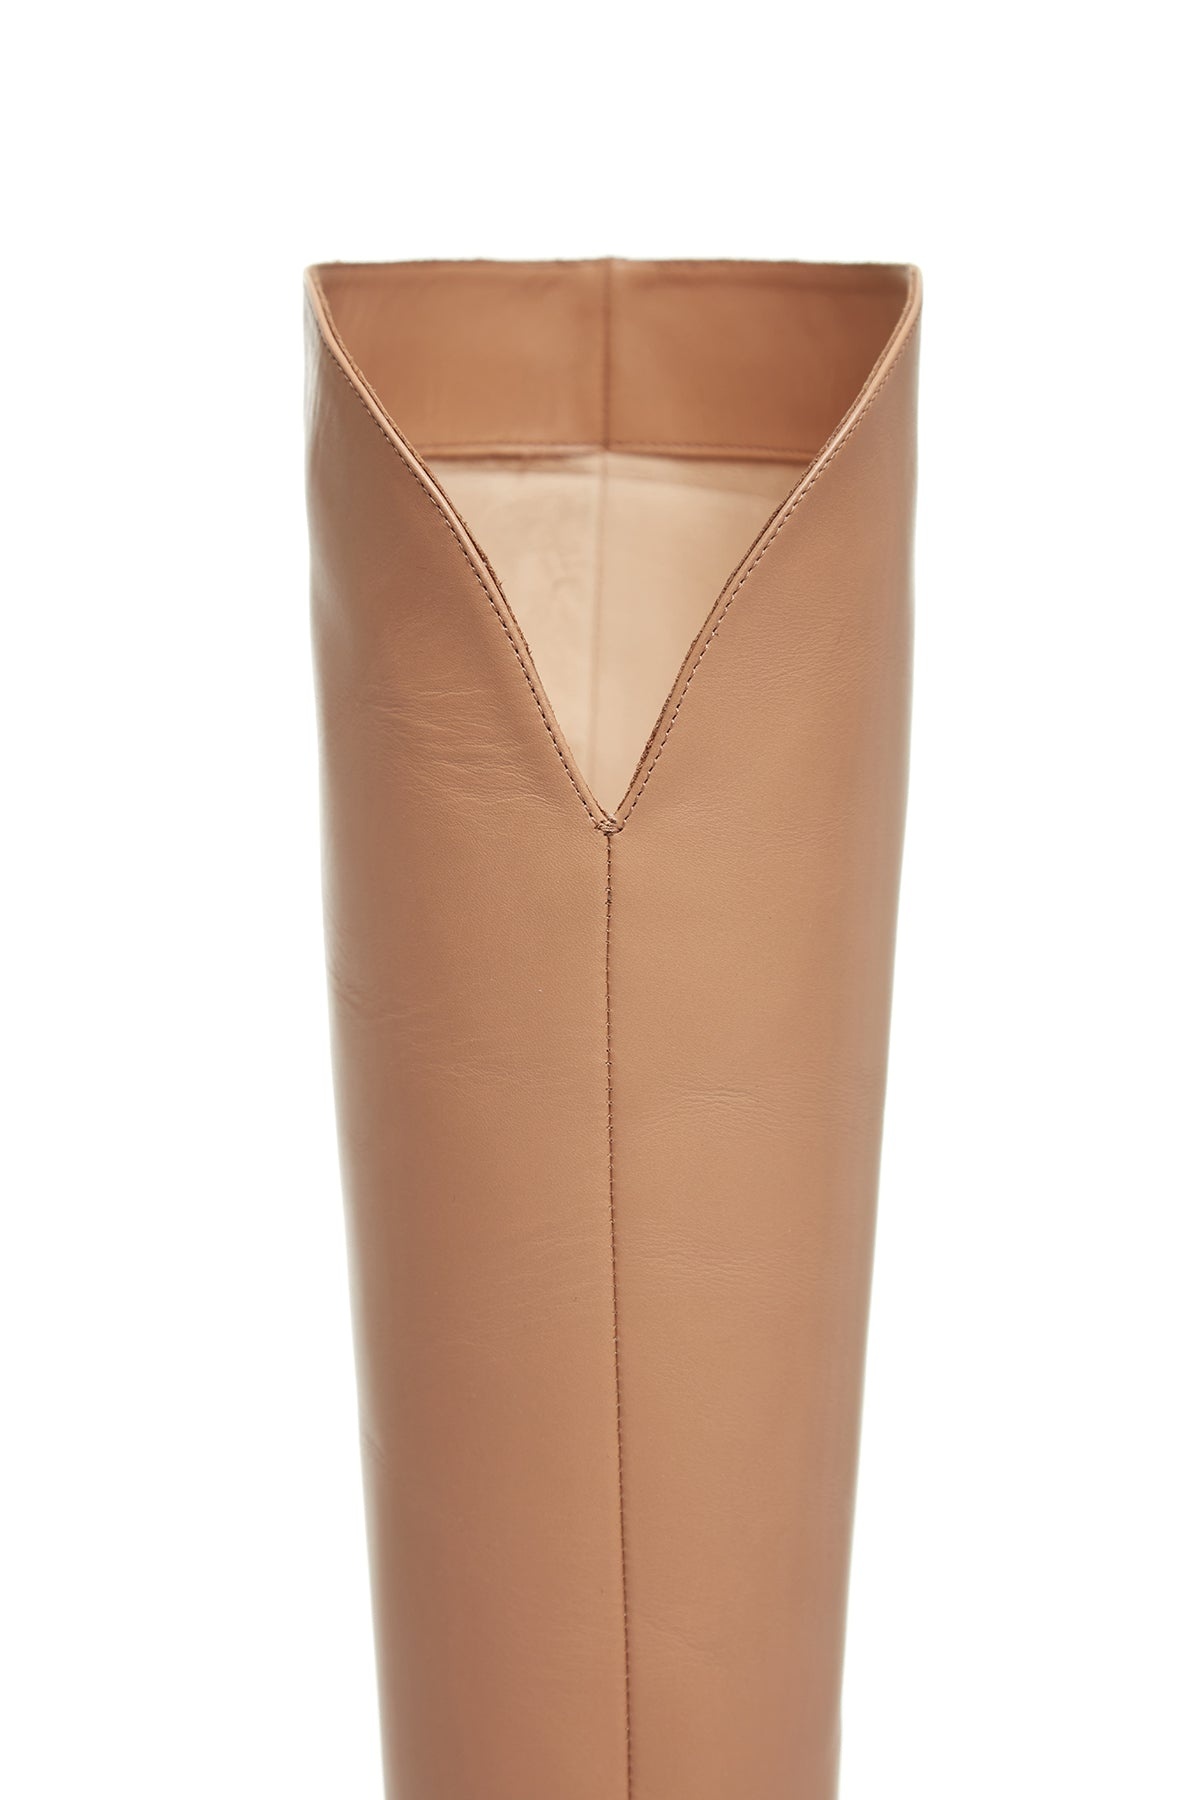 Cora Knee High Boot in Camel Leather - 5